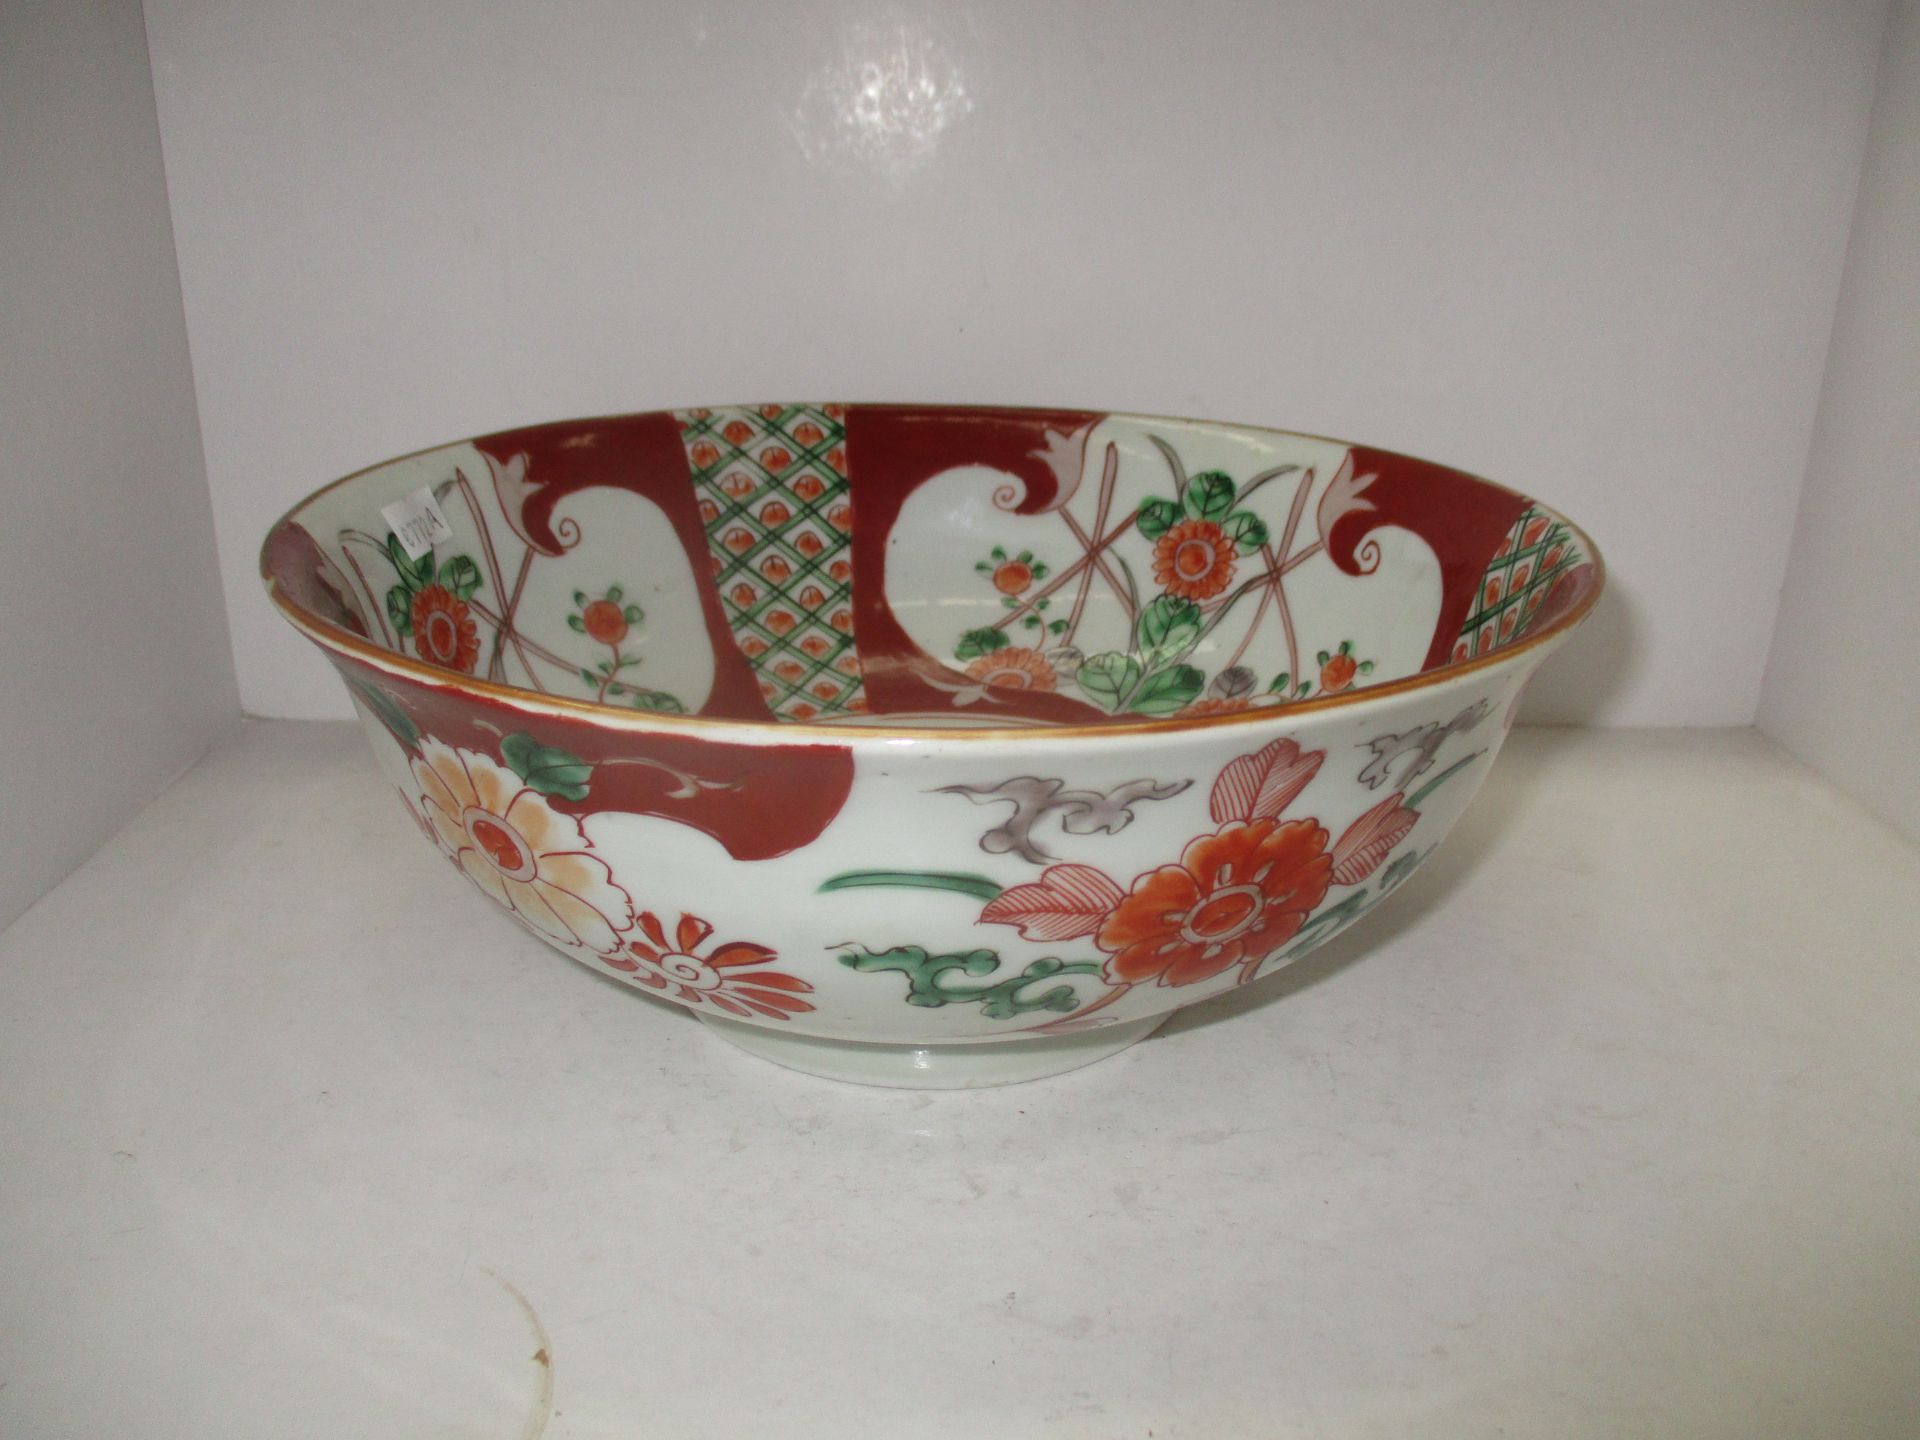 A Chinese floral patterned bowl